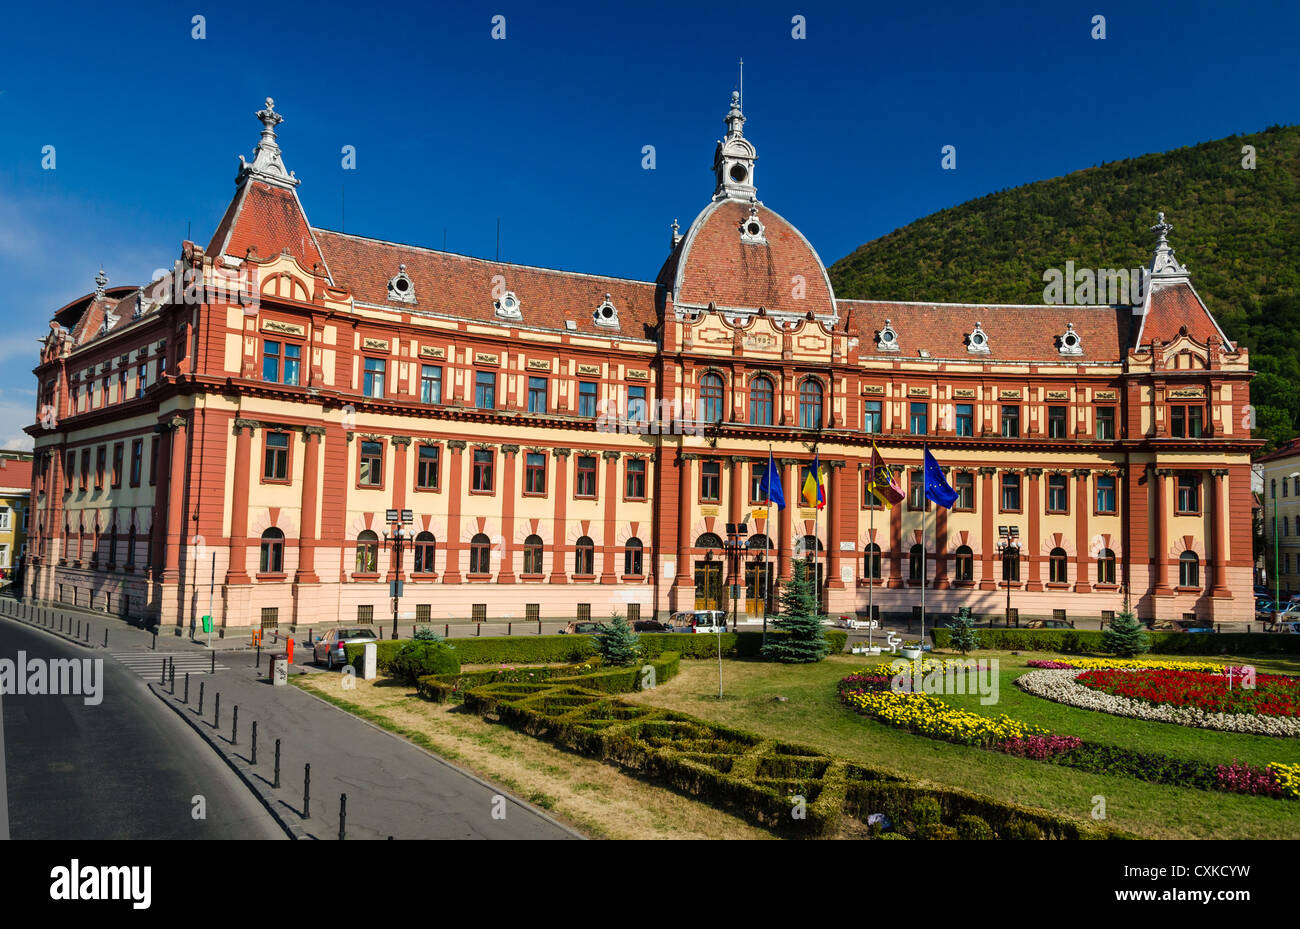 Central administration building of Brasov county, in Romania, XIXth century neobaroque architecture style. Stock Photo